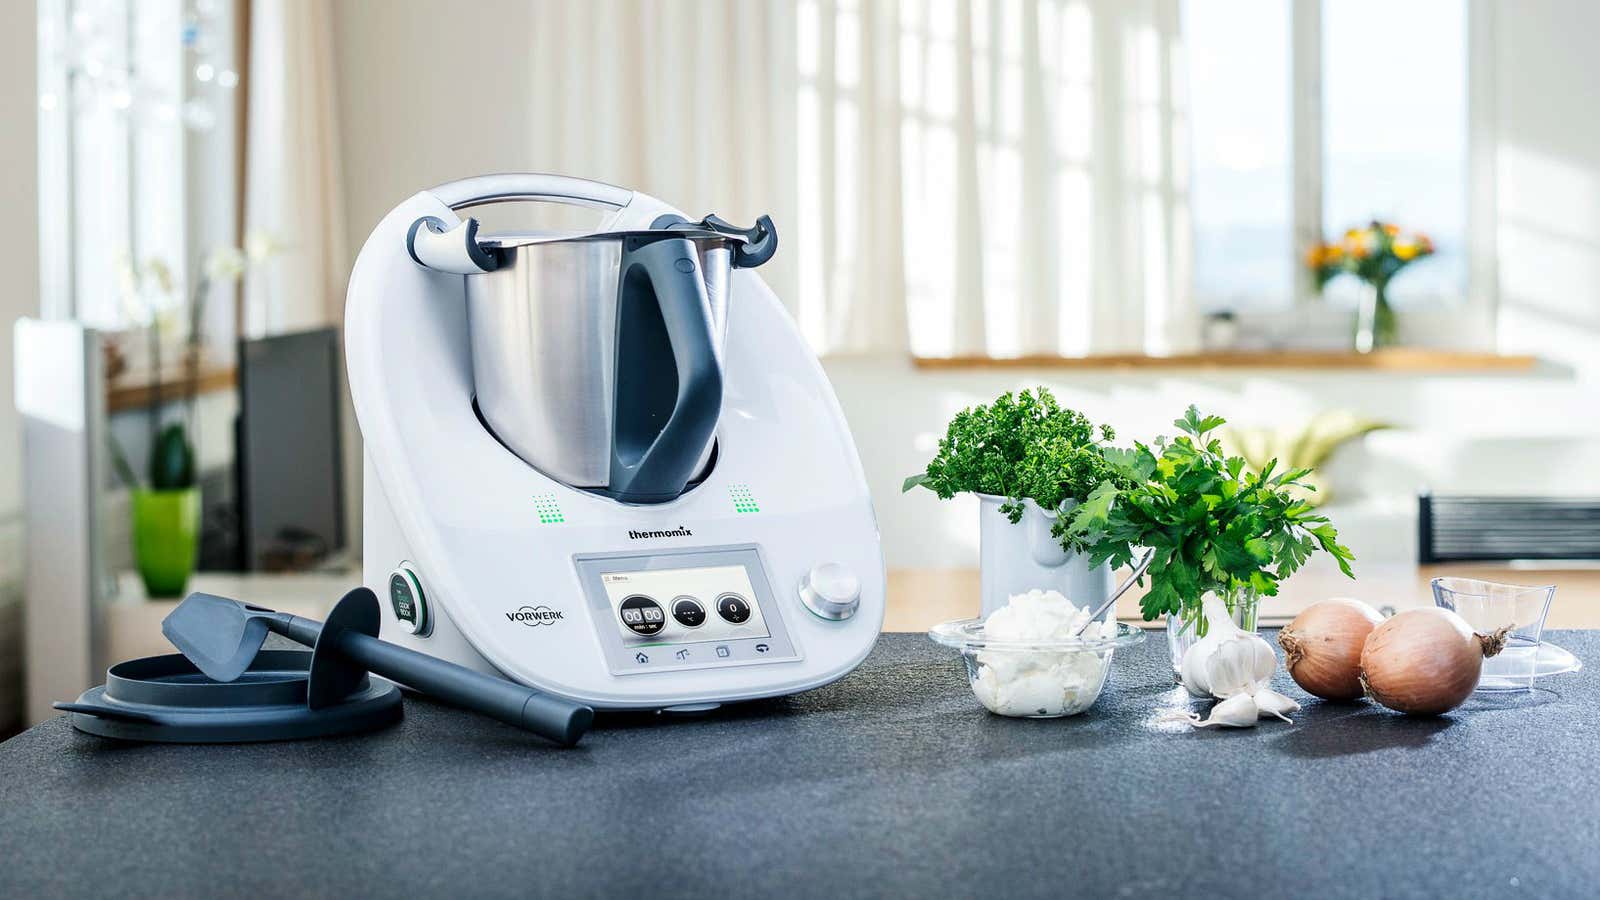 Thermomix, Vorwerks $1,450 kitchen appliance, is coming to the US picture